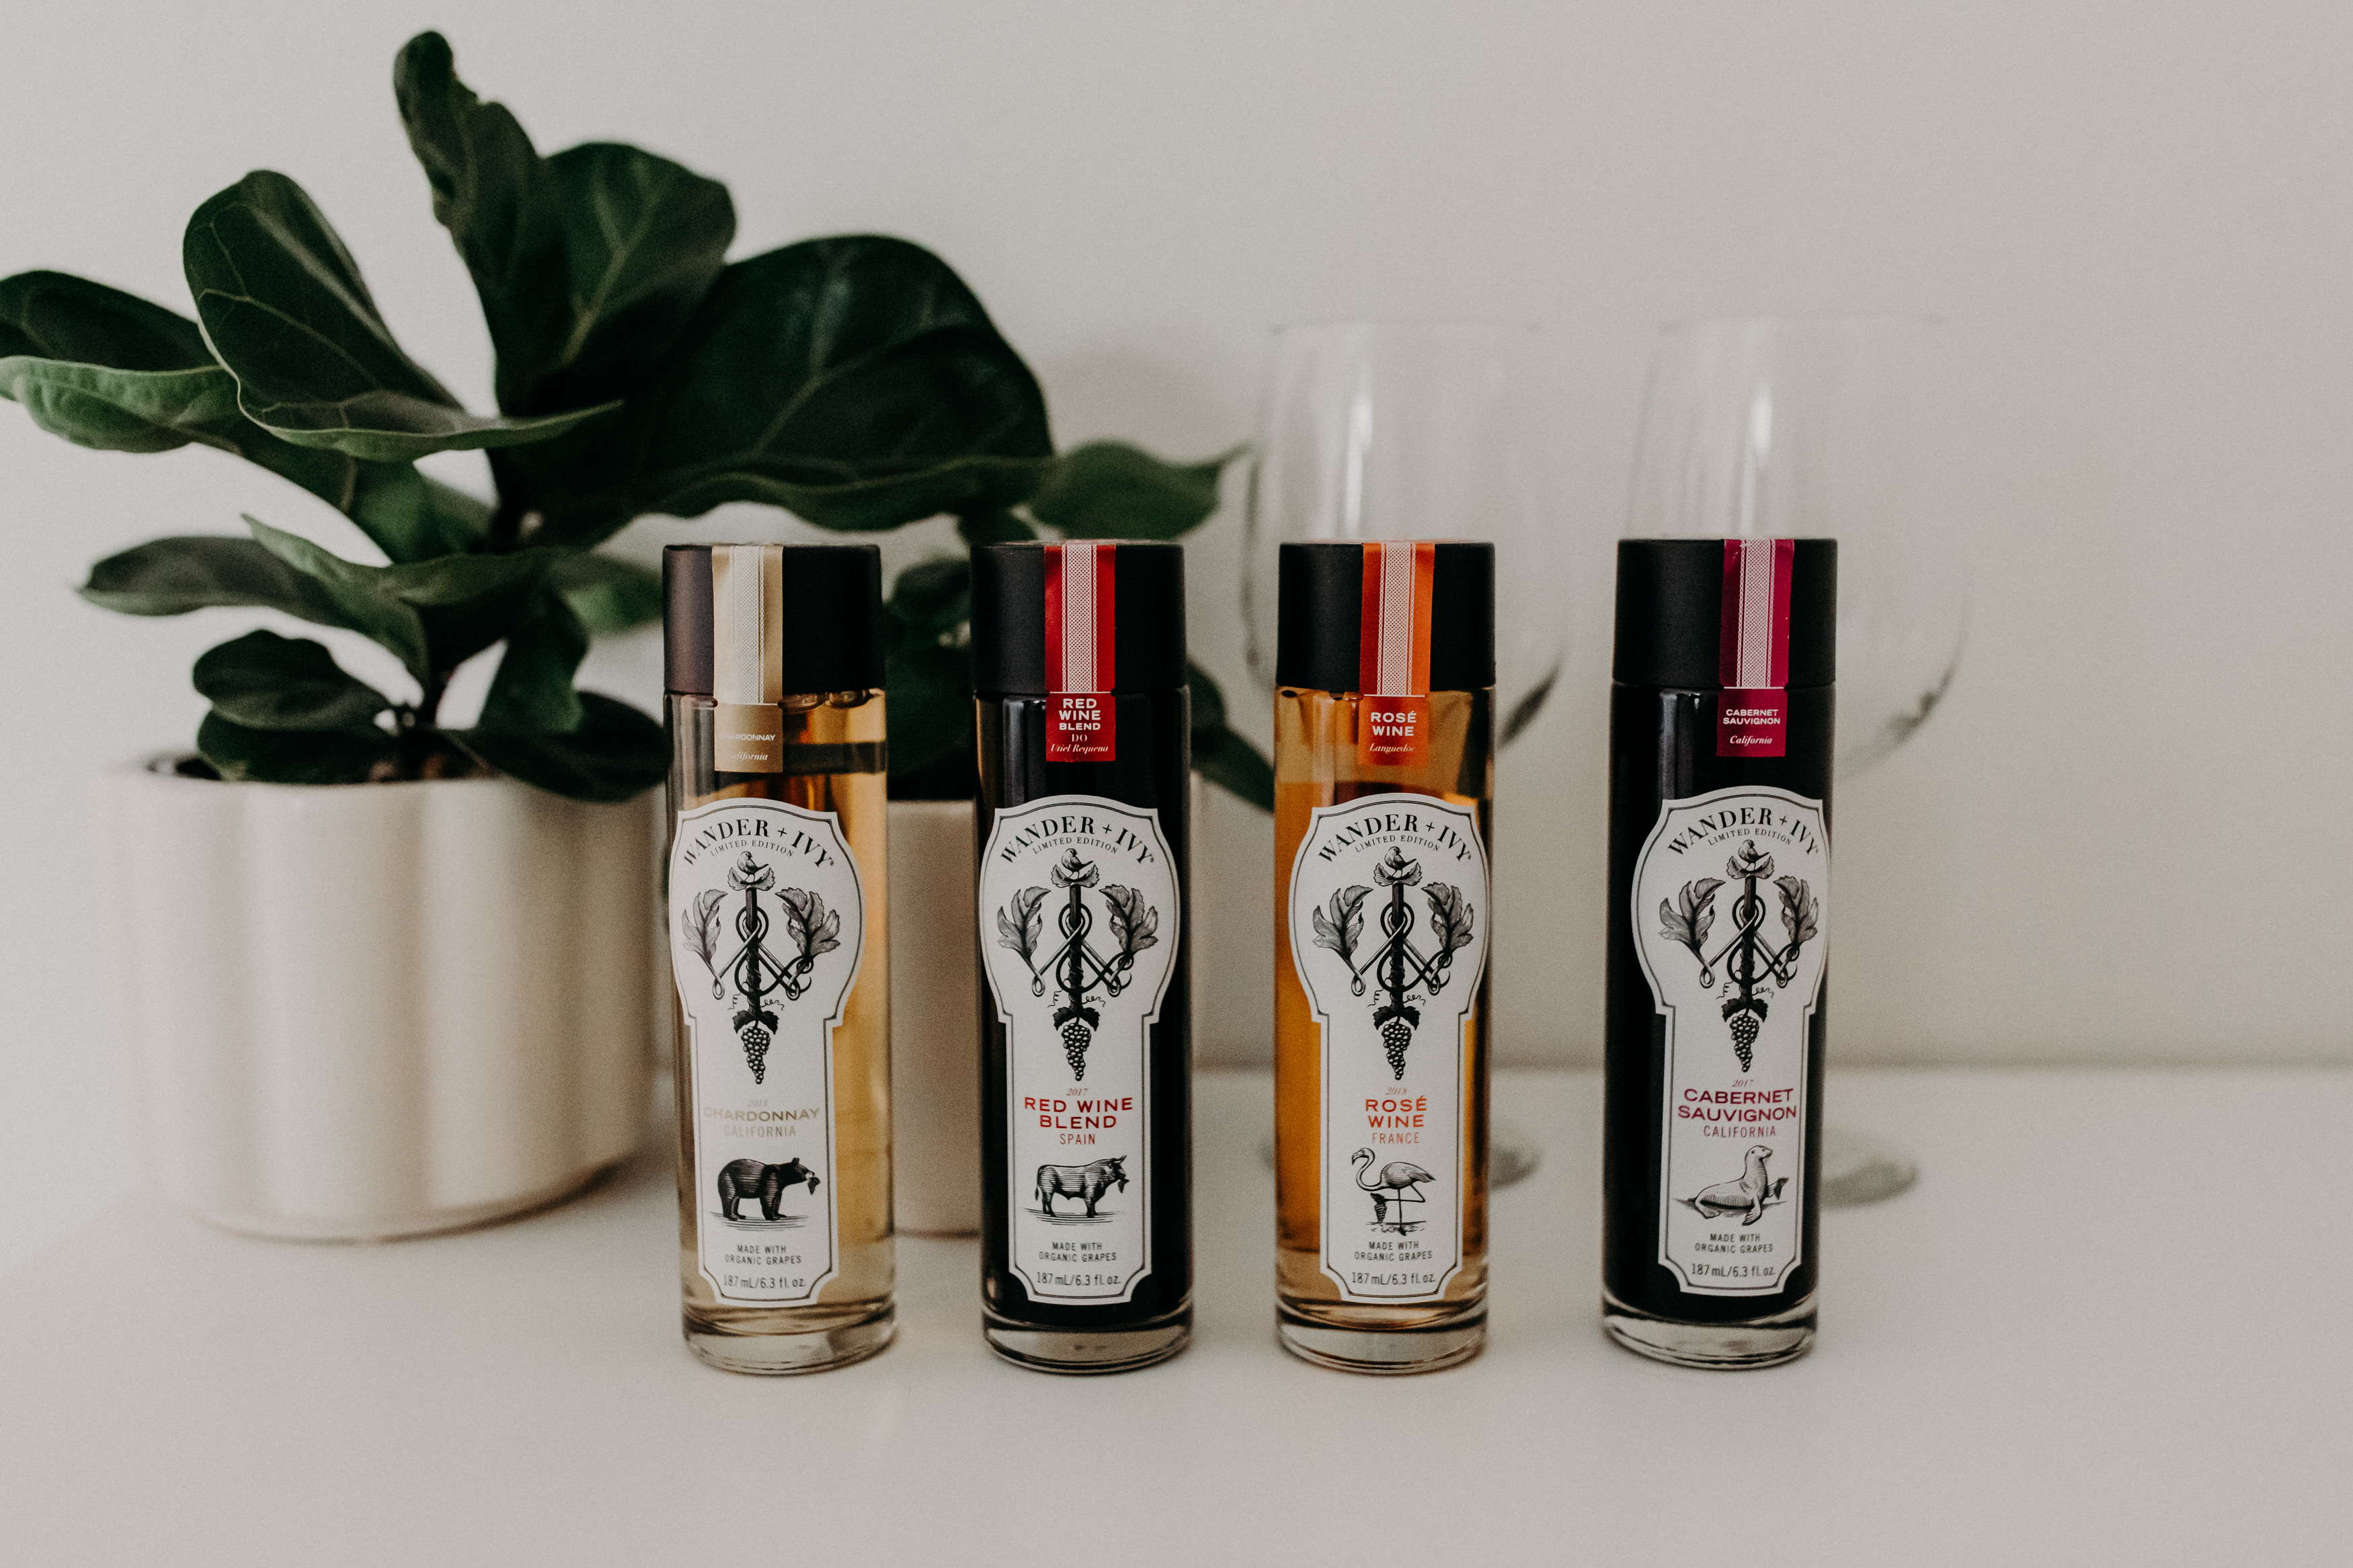 Photo credit: Grace Gatto Photography 

Wander + Ivy experienced 450-percent growth in 2020. The single-serve glass bottles, will be available to ship directly to 39 states and are also available in select retail stores in Colorado, Texas, California and New York.